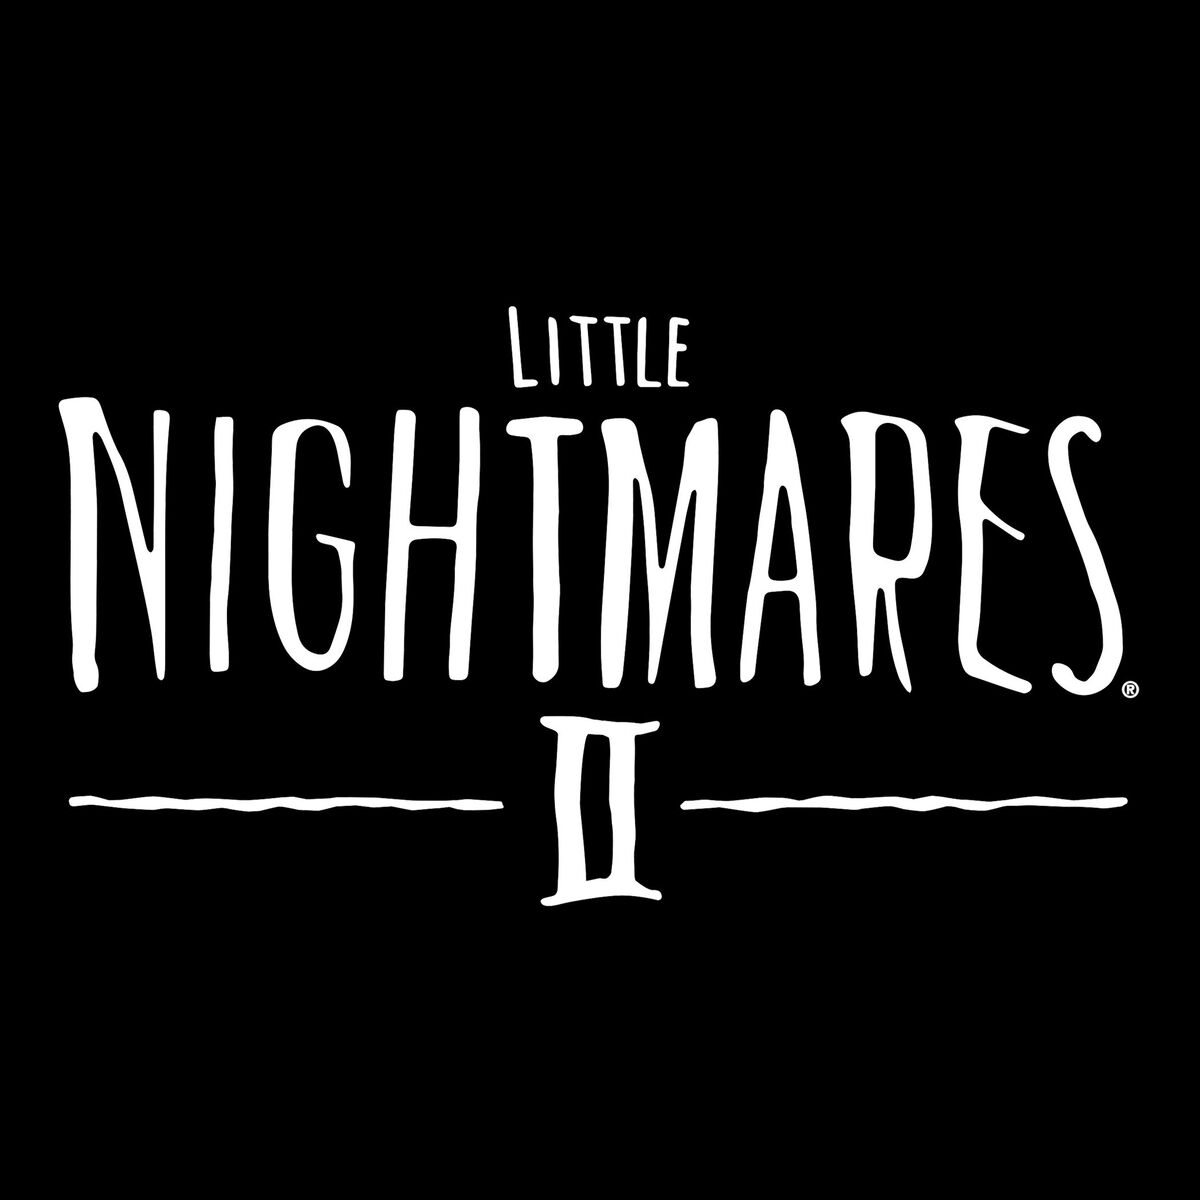 How To Complete Very Little Nightmares